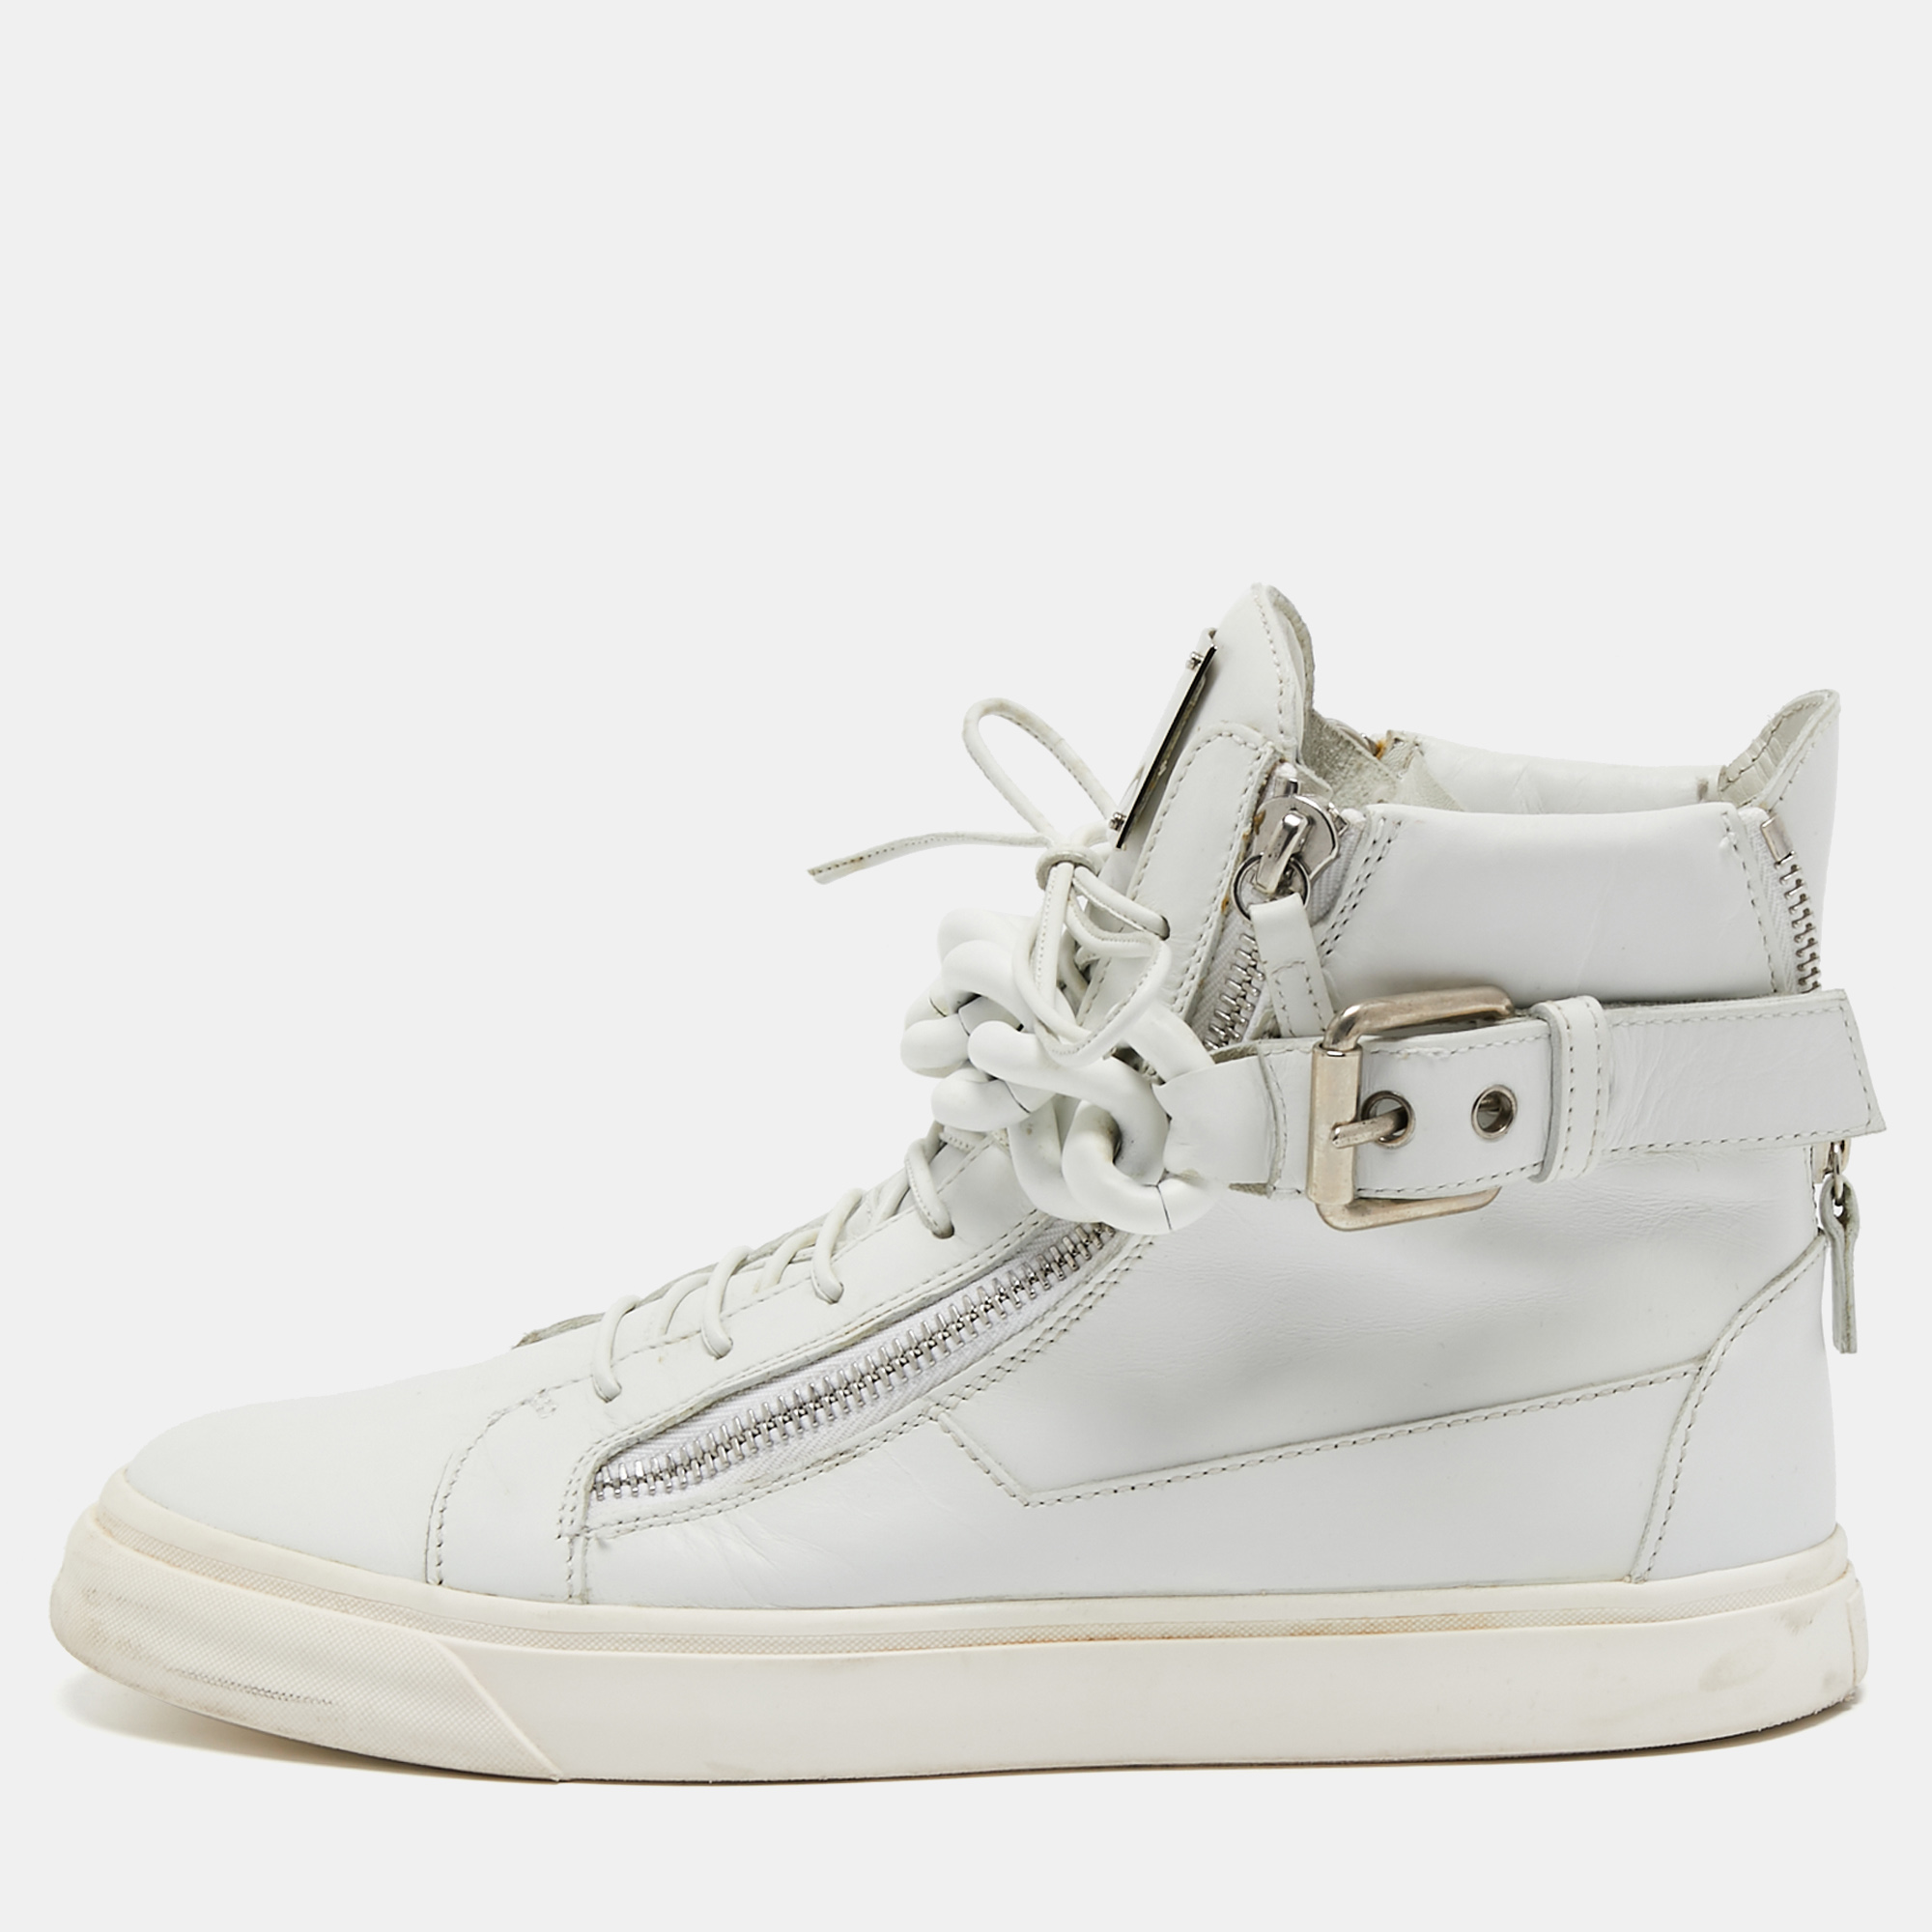 Giuseppe Zanotti brings you these sneakers that are super sturdy stunning and stylish. They are crafted from white leather into a classic high top silhouette. They are highlighted with zipper fastenings metal chain detailing and silver tone hardware. Add these trendy sneakers to your collection to sport a dapper look.